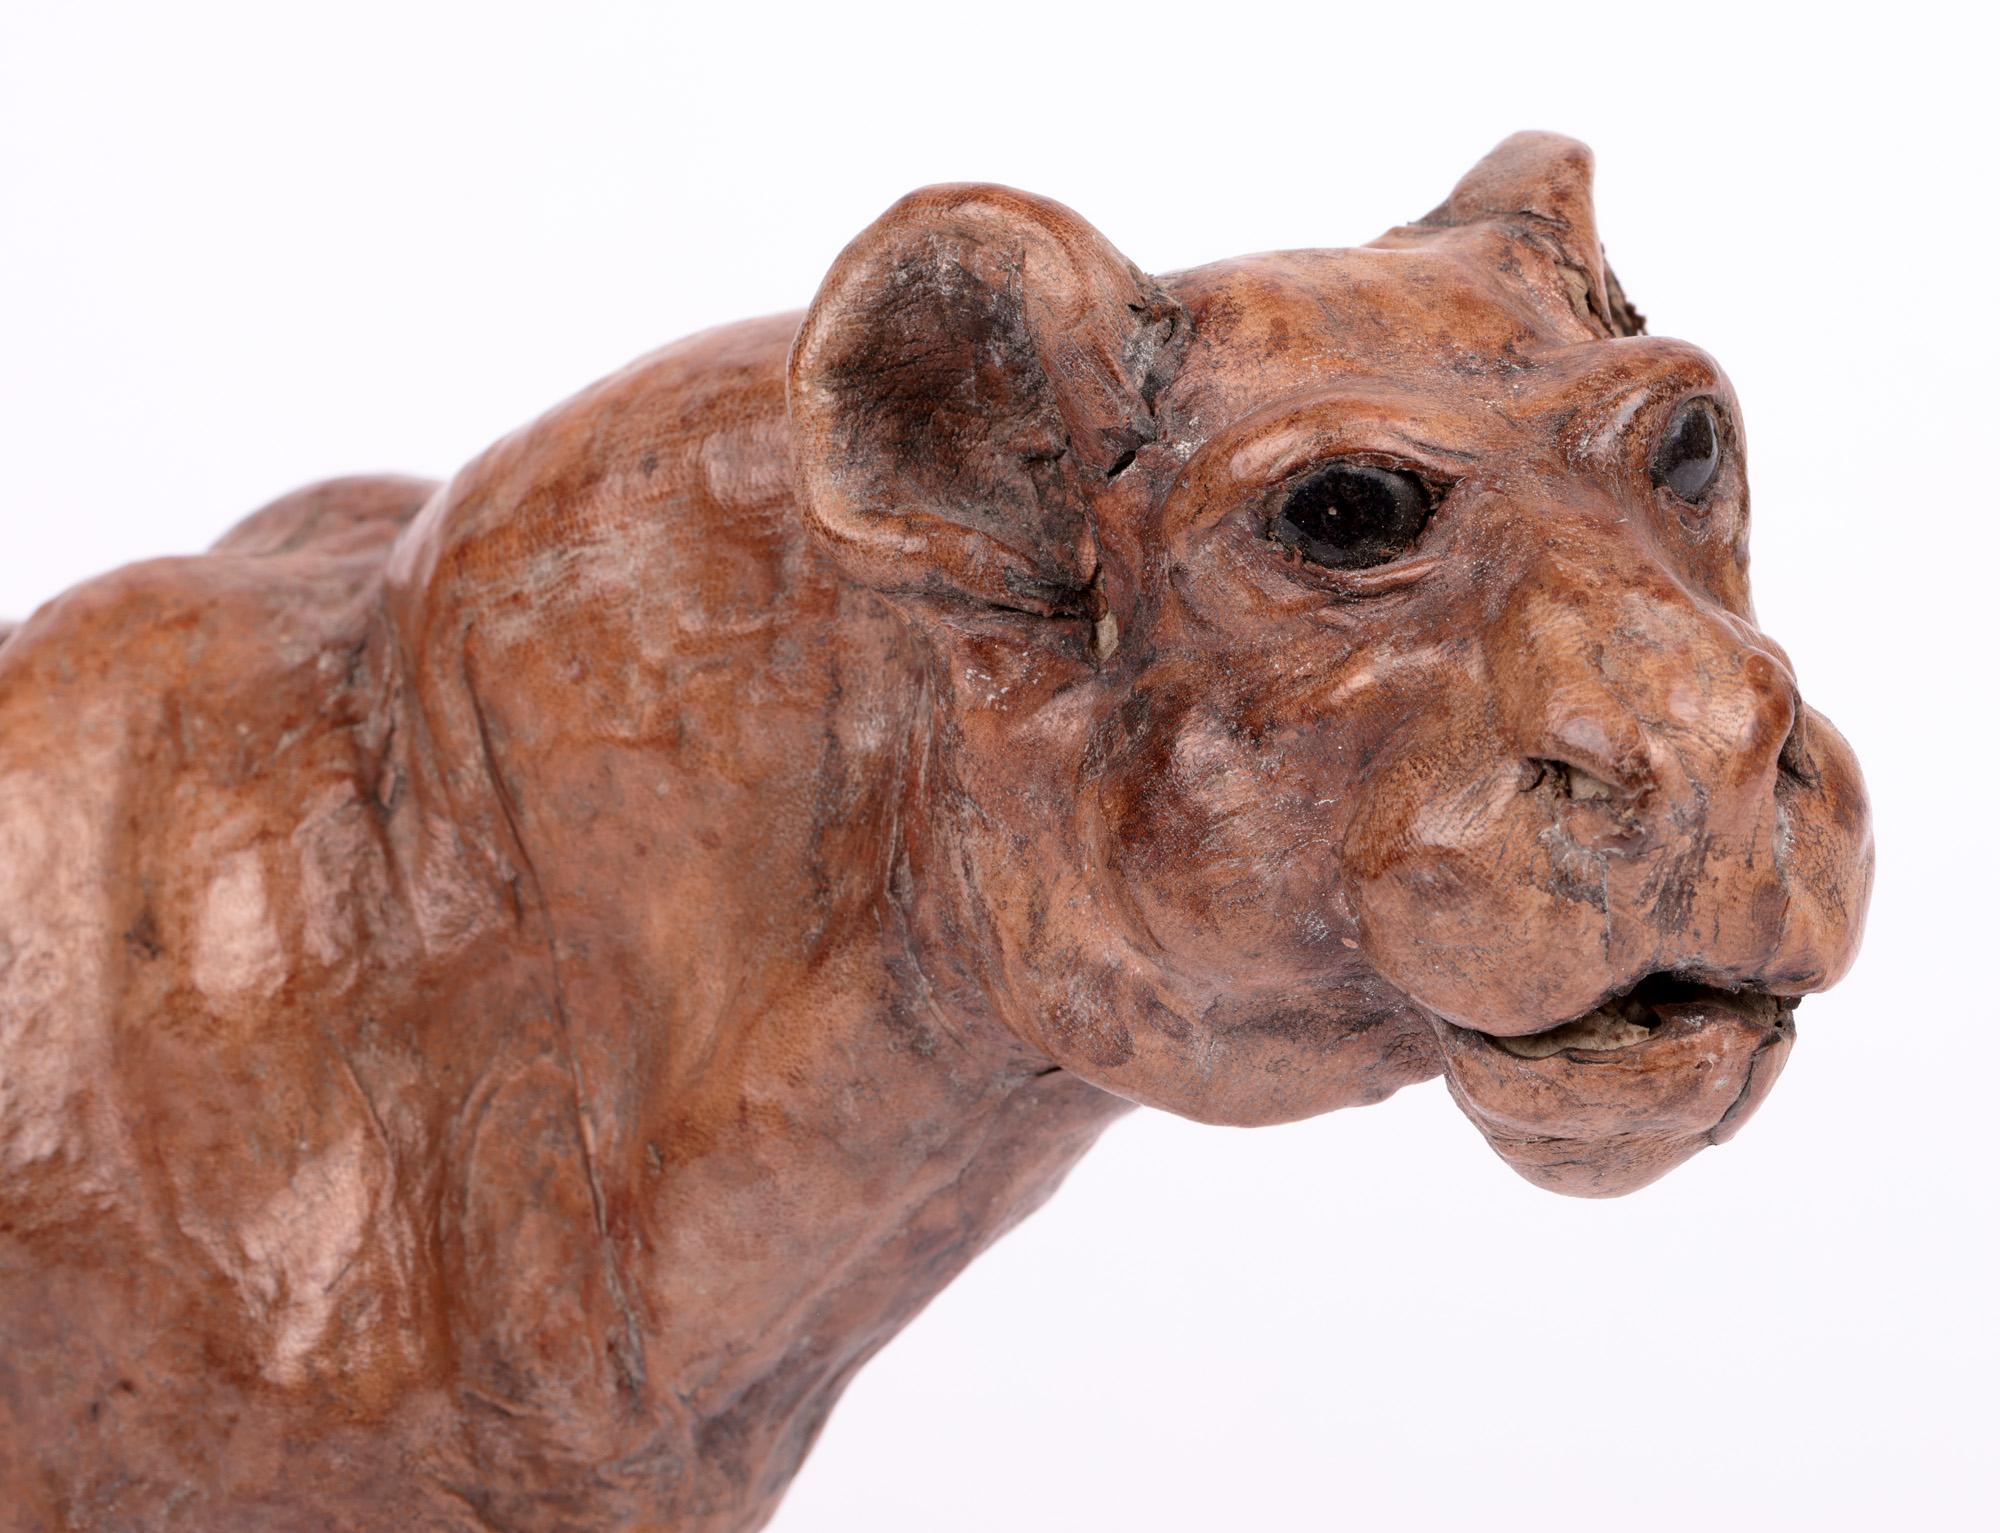 A stylish and unusual Victorian hand sculpted pressed leather figure of a lioness dating from the latter 19th century. The figure is beautifully made and portrays a prowling lioness her head held to one side. The figure is well sculpted and made in